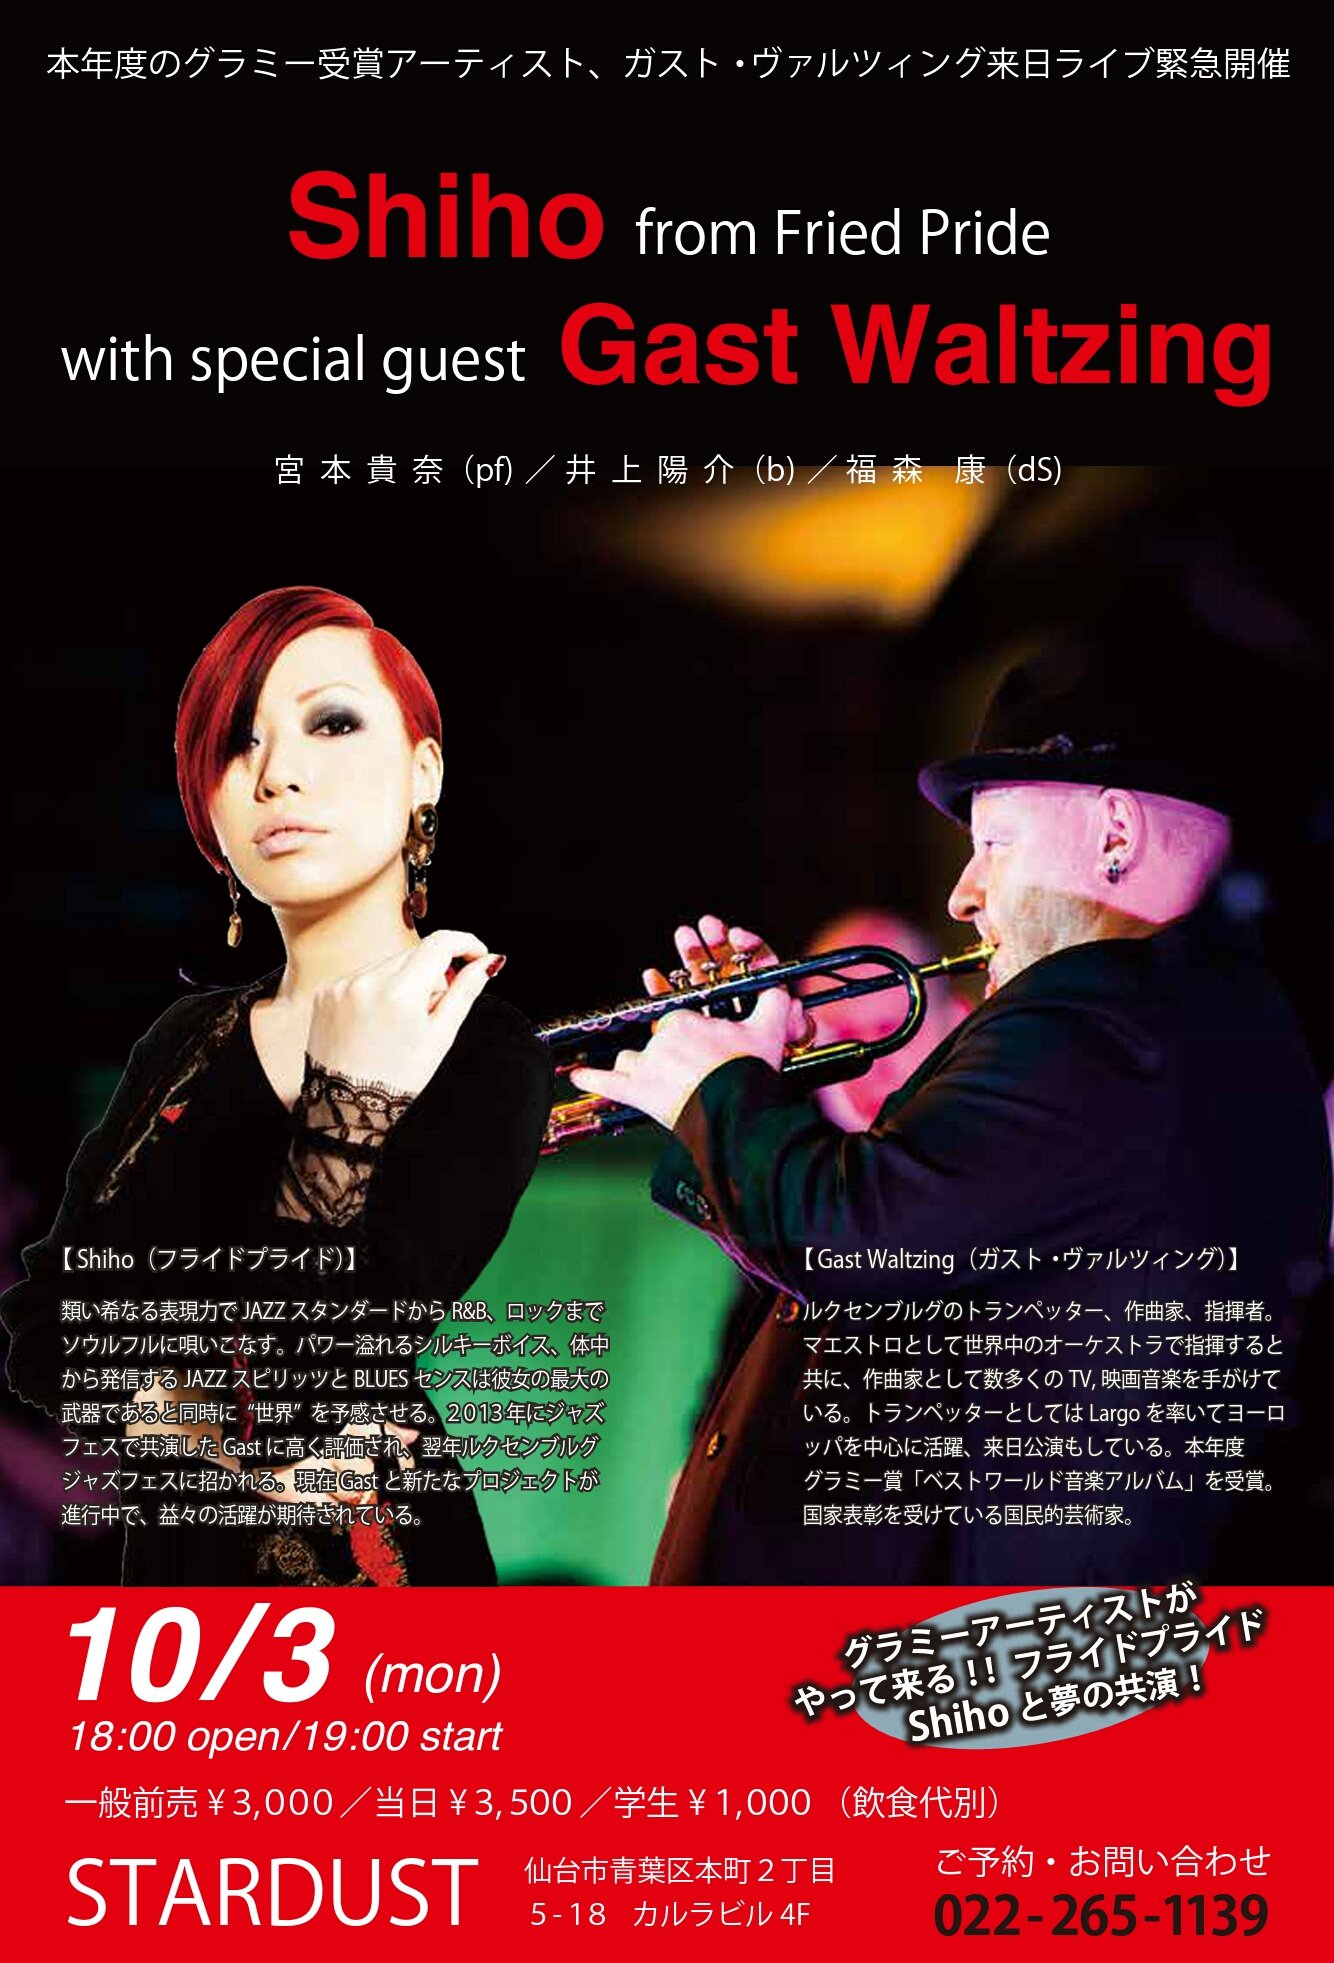 Shiho from Fried Pride with special guest Gast Waltzing